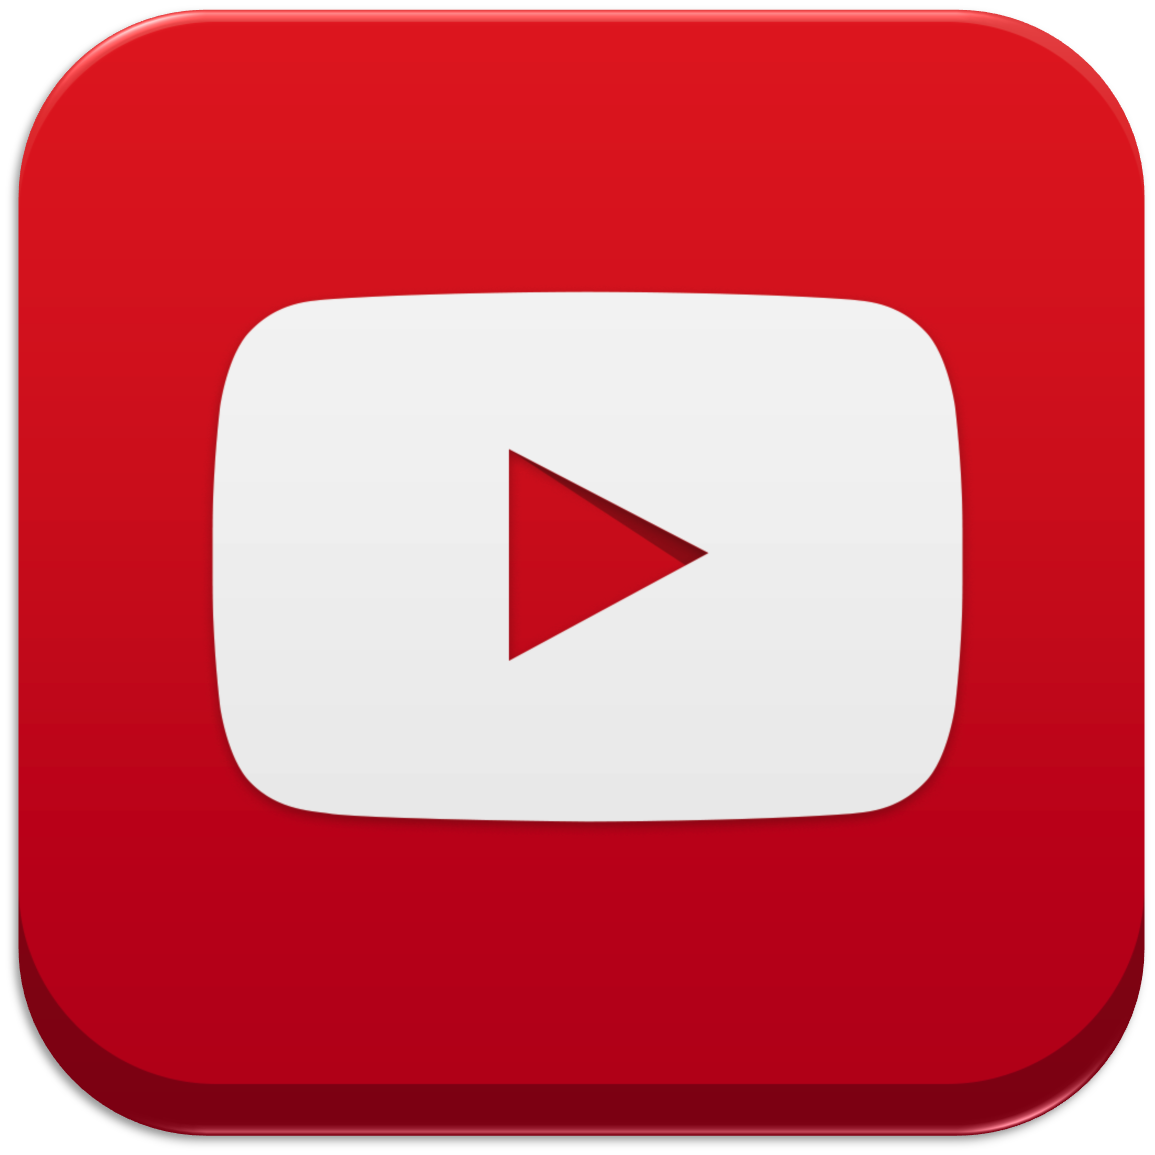 Youtube Subscribe Chanell Png